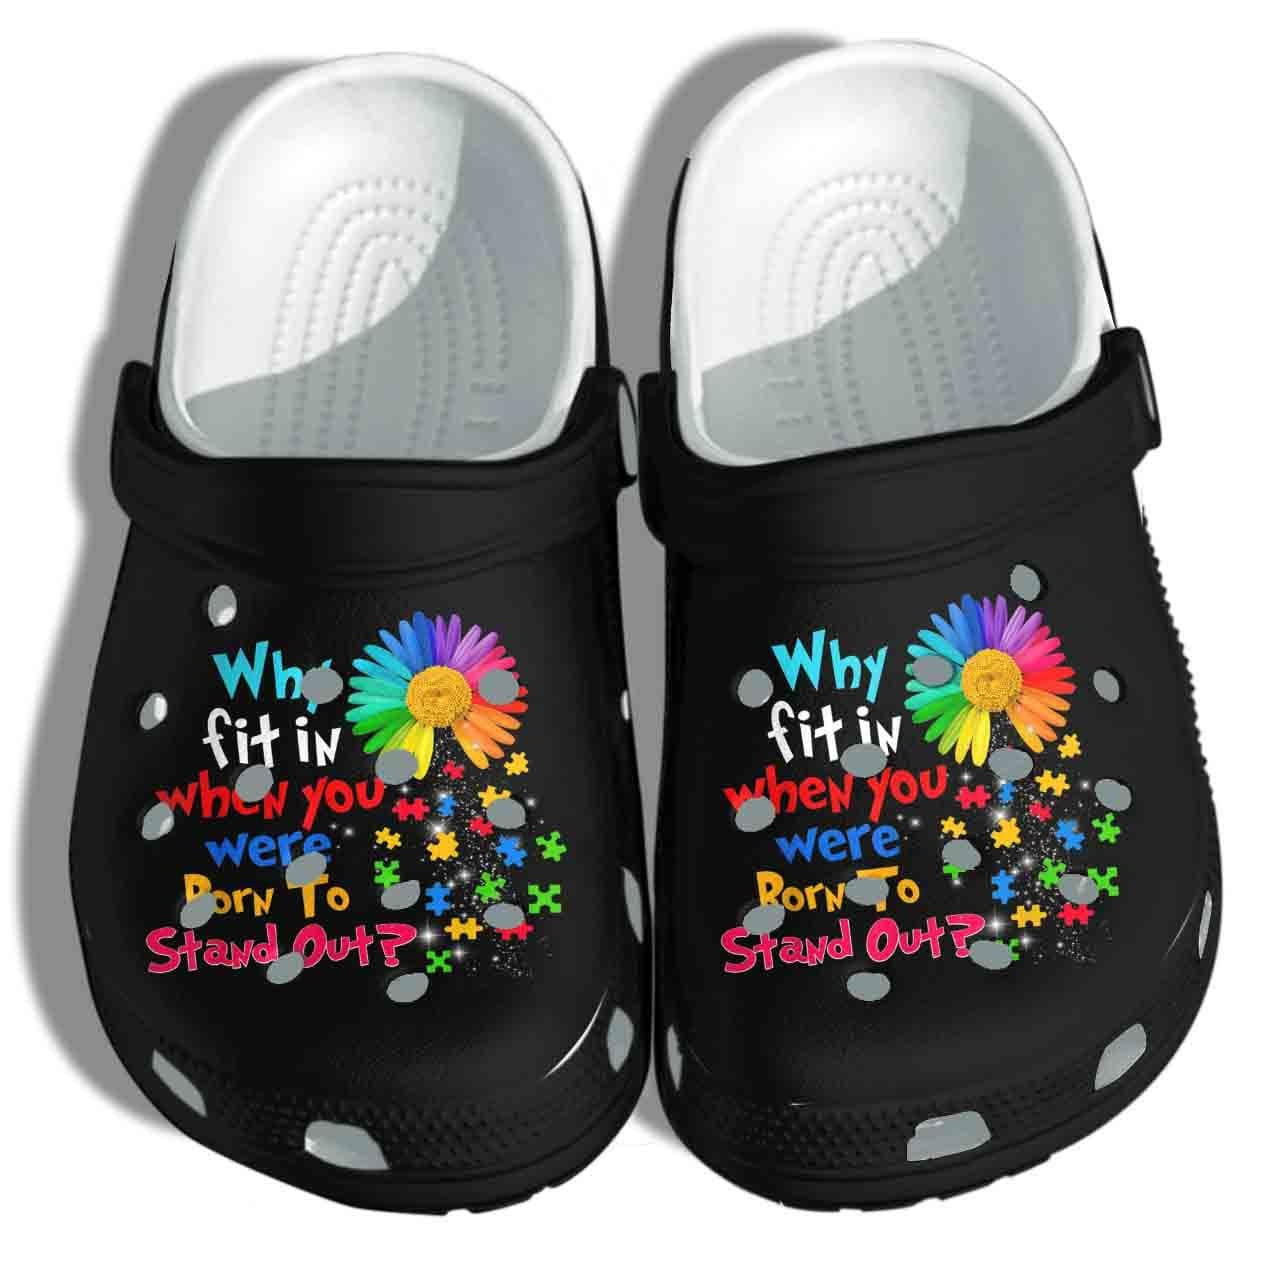 Autism Awareness Crocs Puzzle Flower Born To Stand Out Crocband Clog Shoes For Men Women